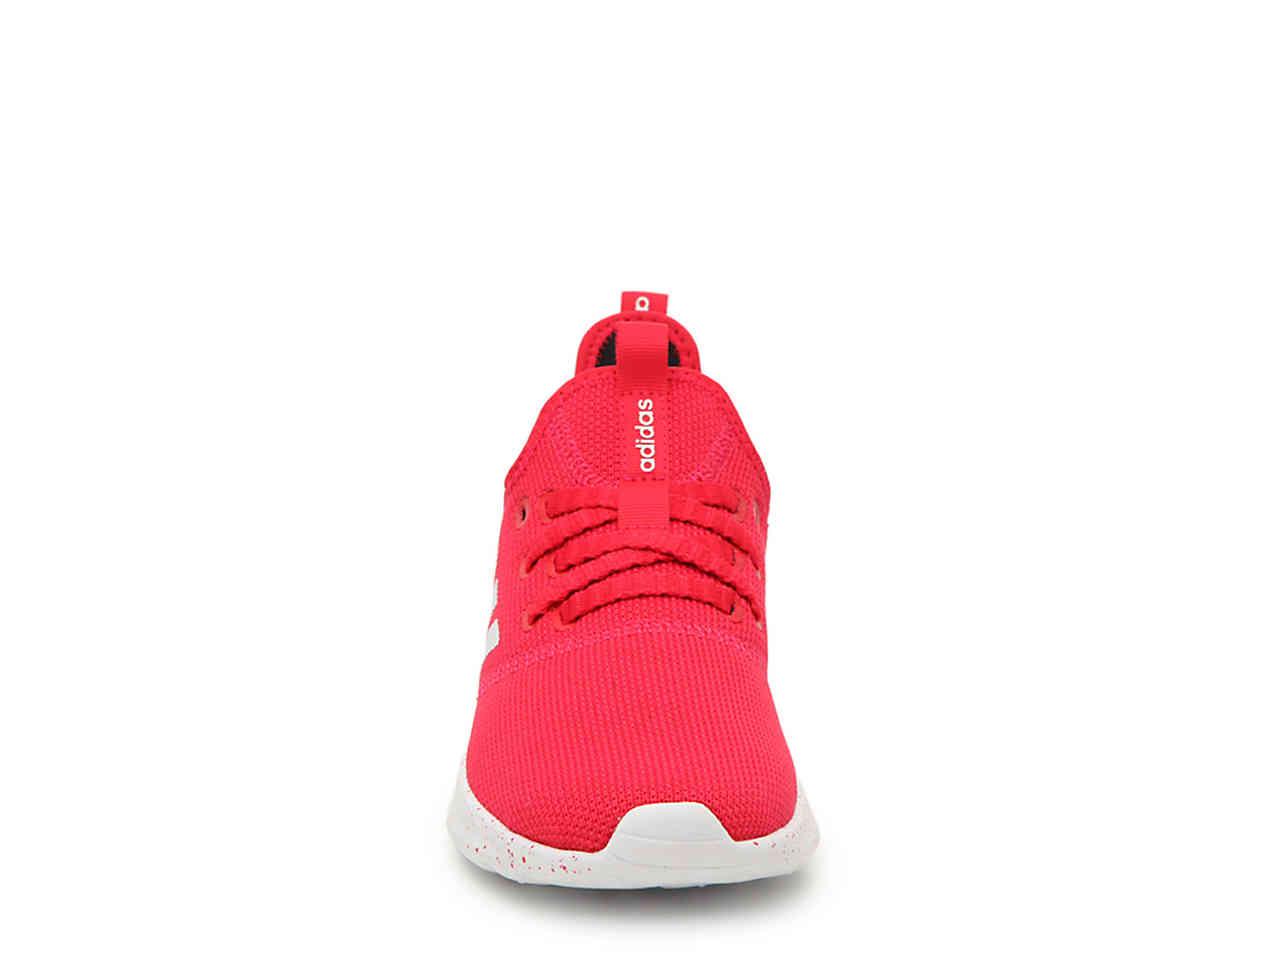 adidas Neoprene Cloudfoam Pure Shoes in Fuchsia (Red) | Lyst